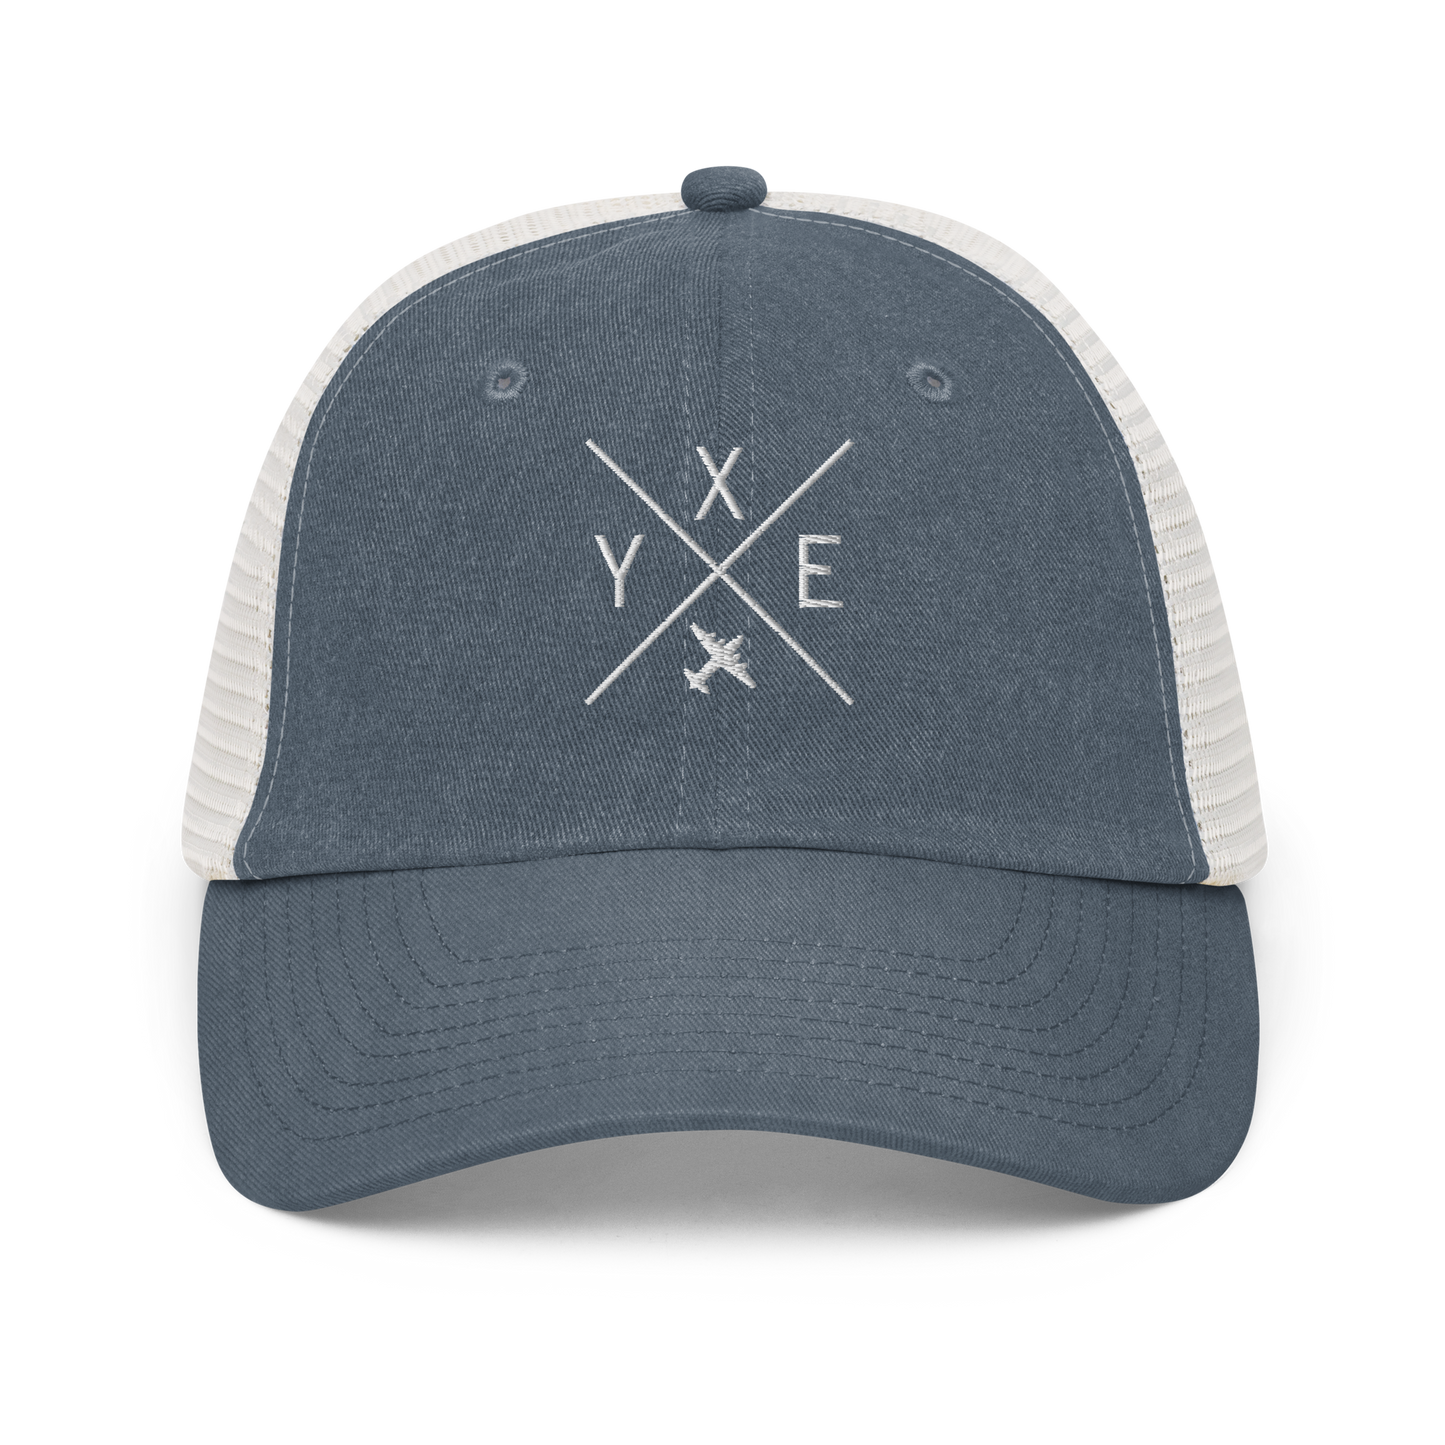 YHM Designs - YXE Saskatoon Pigment-Dyed Trucker Cap - Crossed-X Design with Airport Code and Vintage Propliner - White Embroidery - Image 06